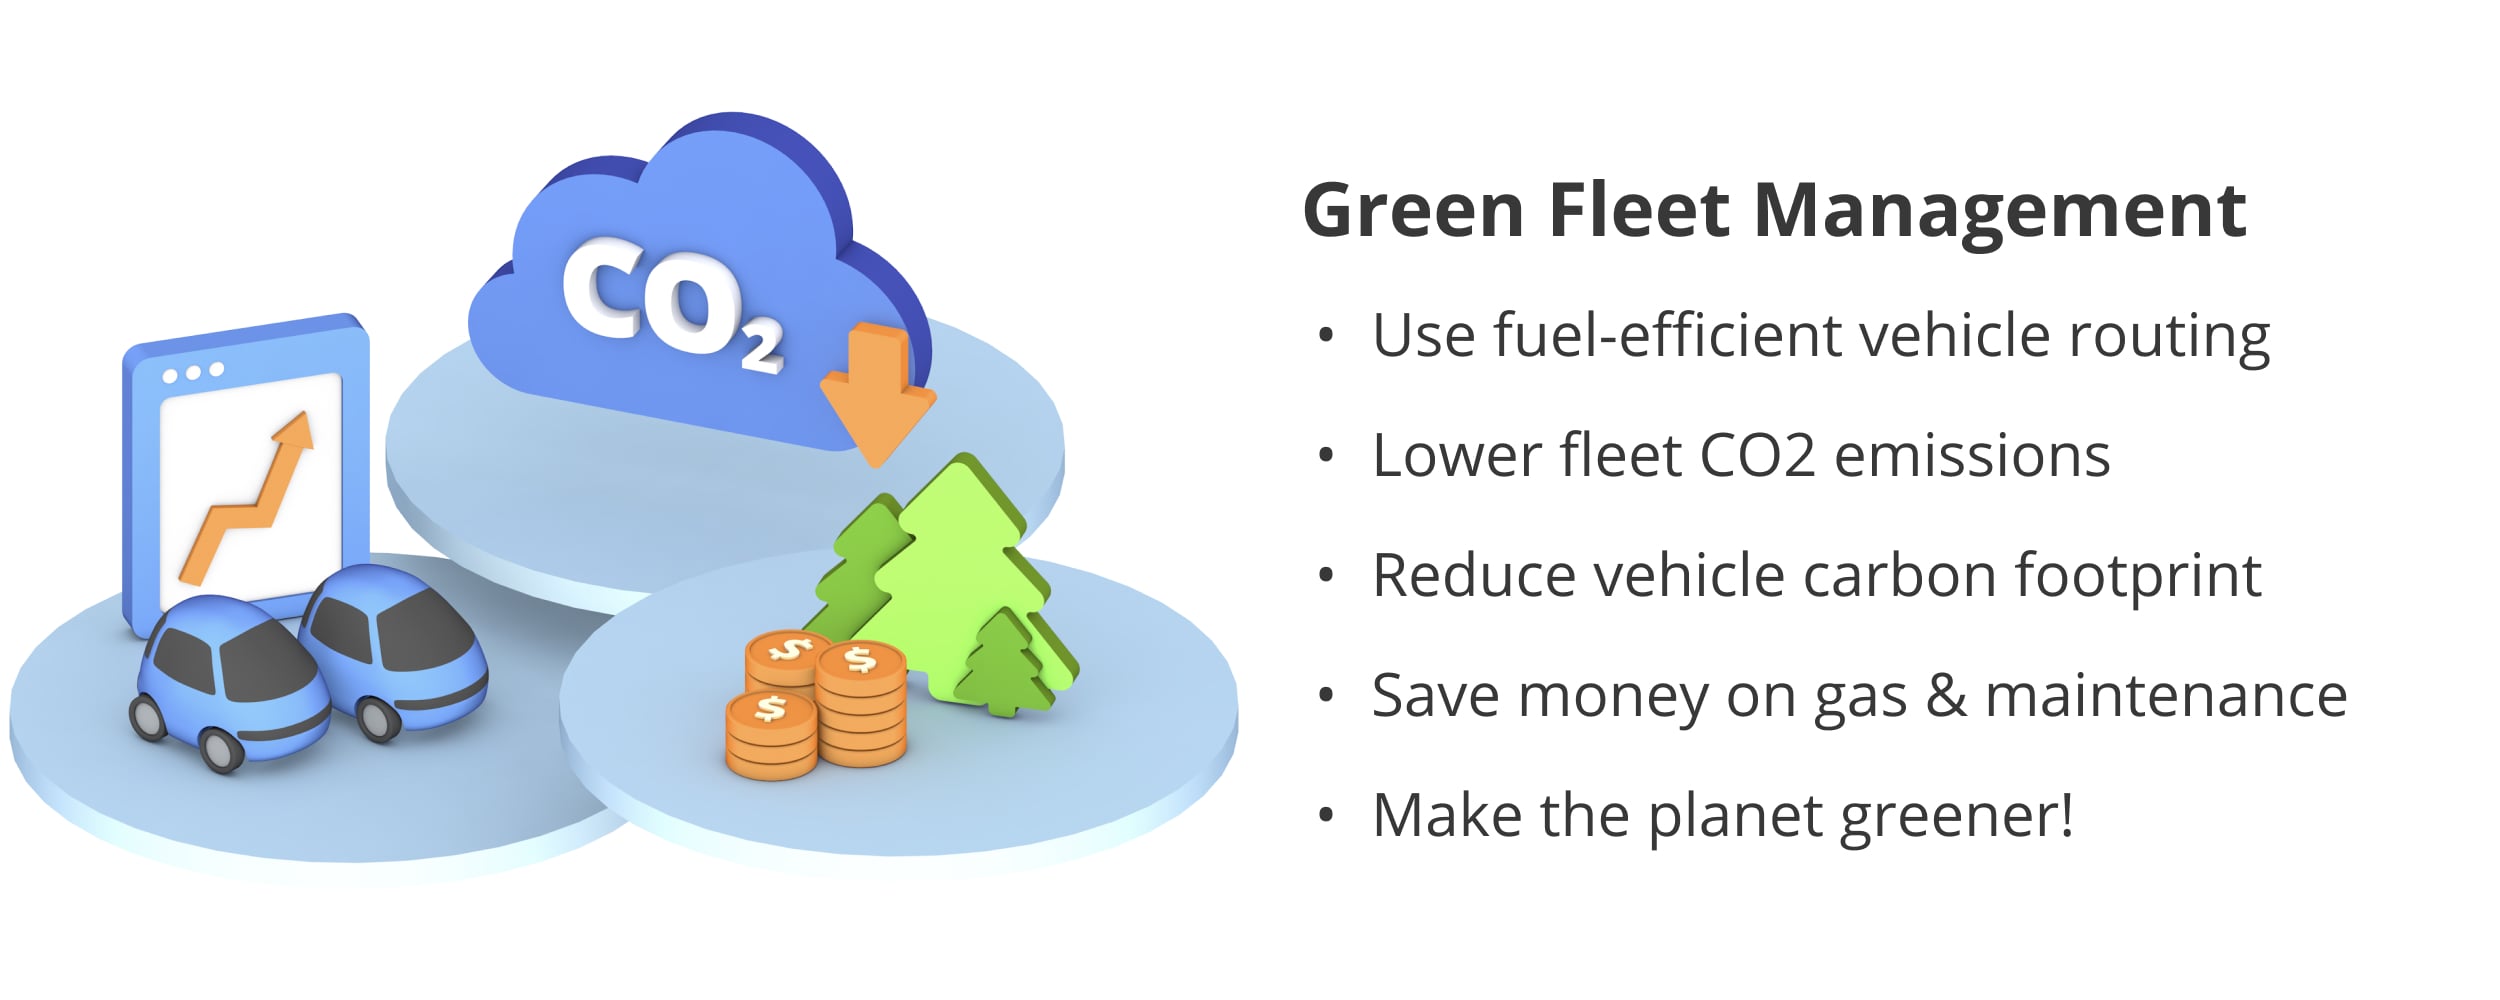 The benefits of green fleet management and using fuel-efficient vehicles.